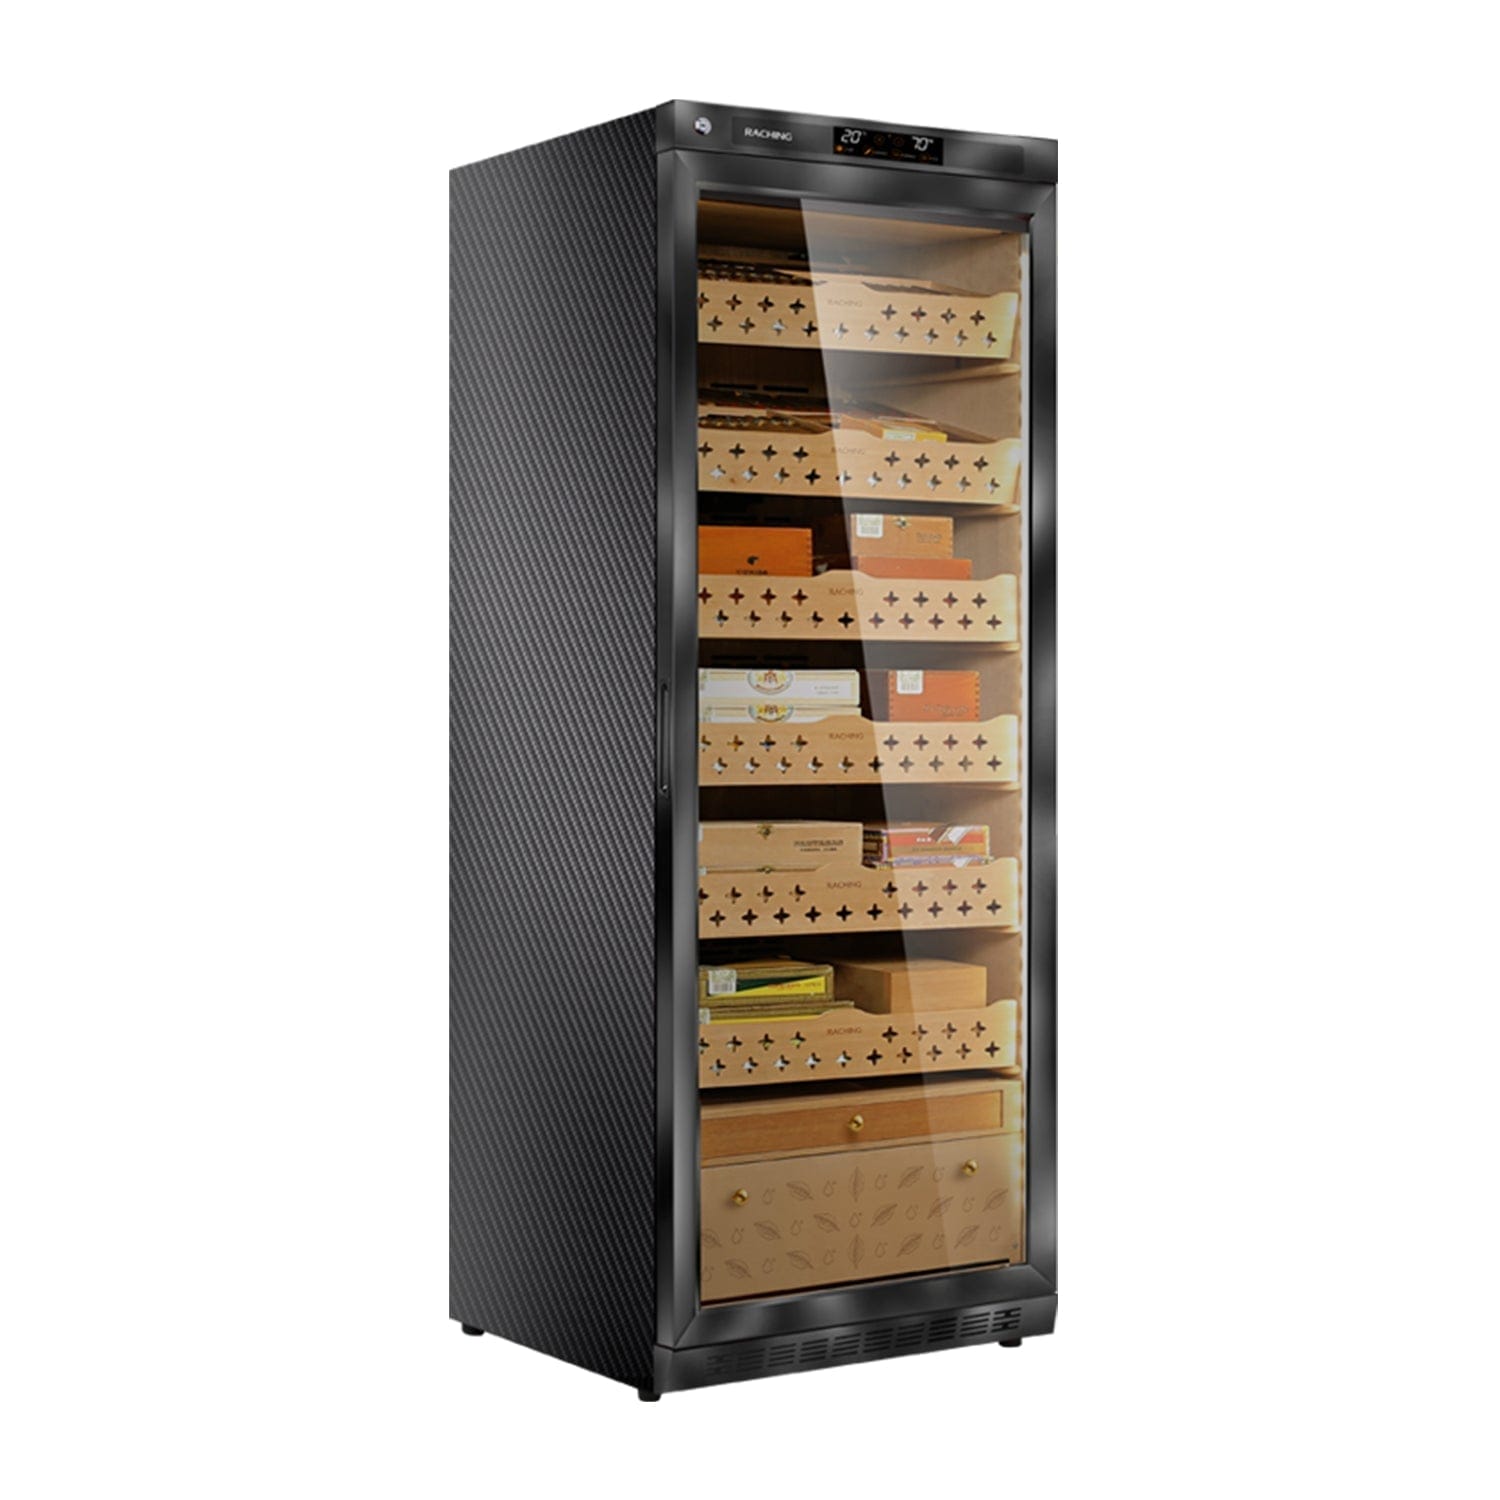 Raching Climate Control Cigar Humidor MON2800A Wine Coolers Empire